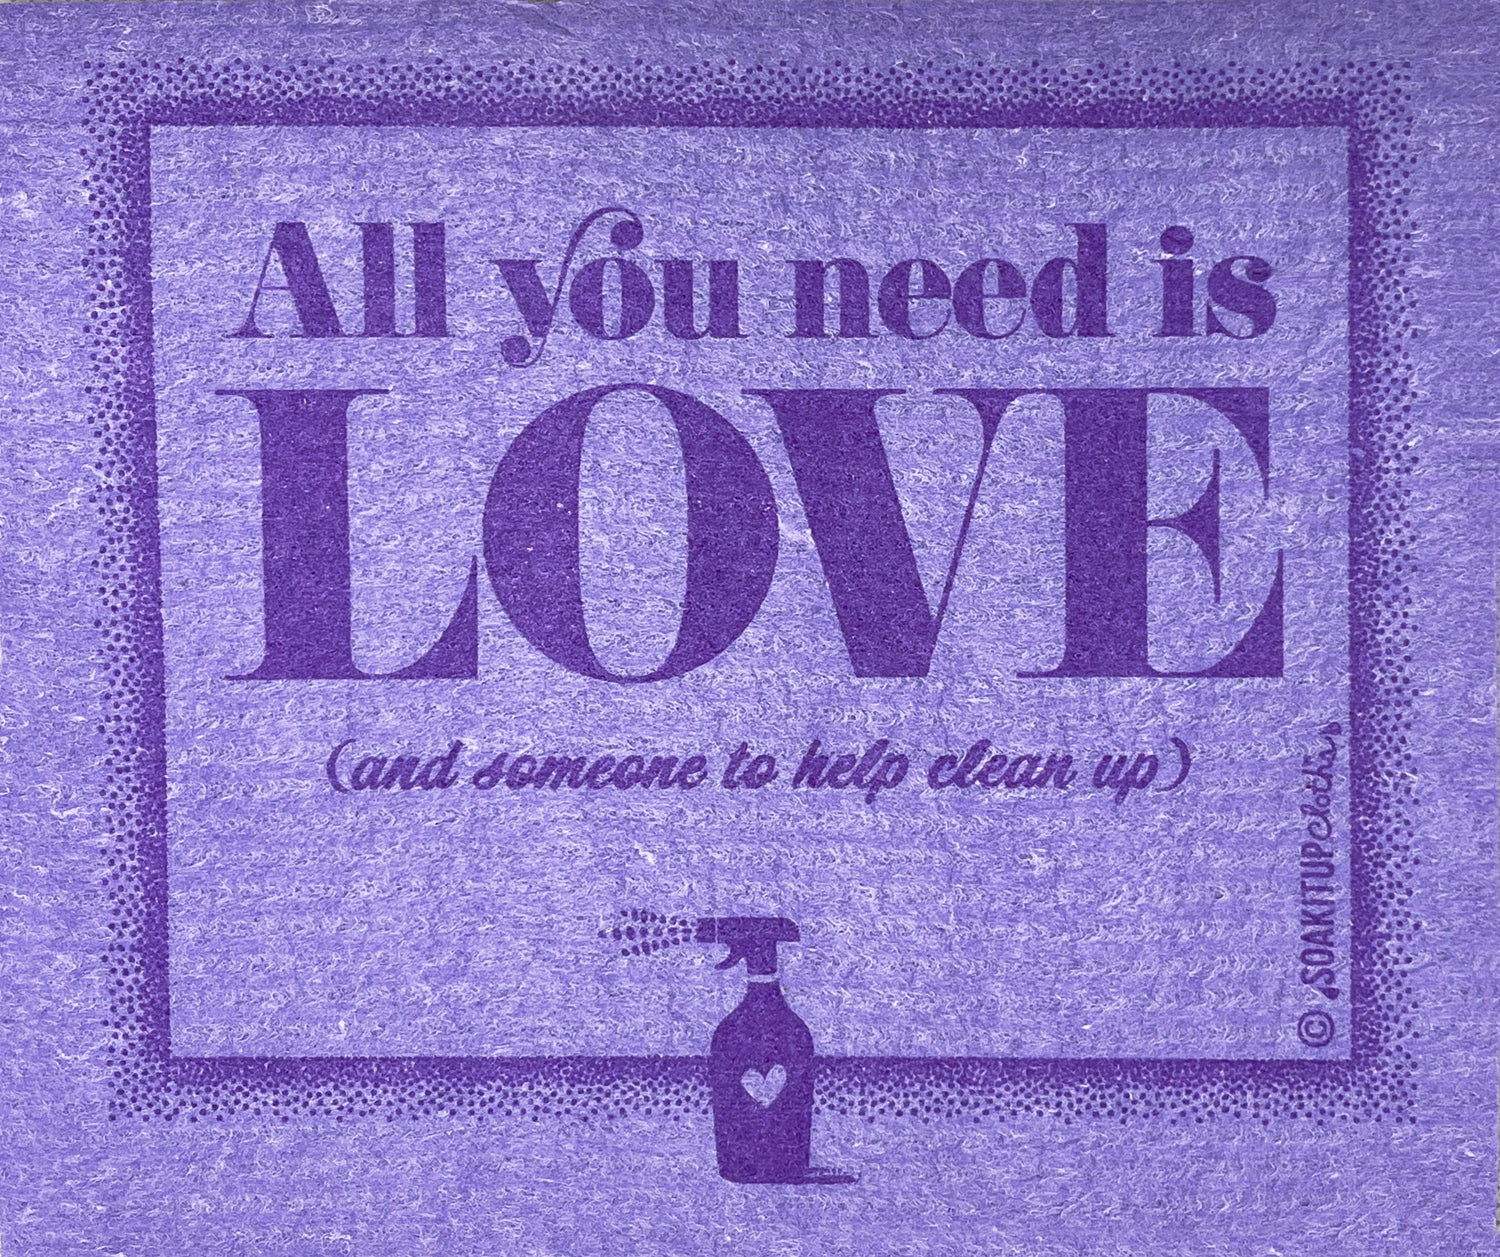 All You Need is LOVE (and someone to help clean up) Swedish